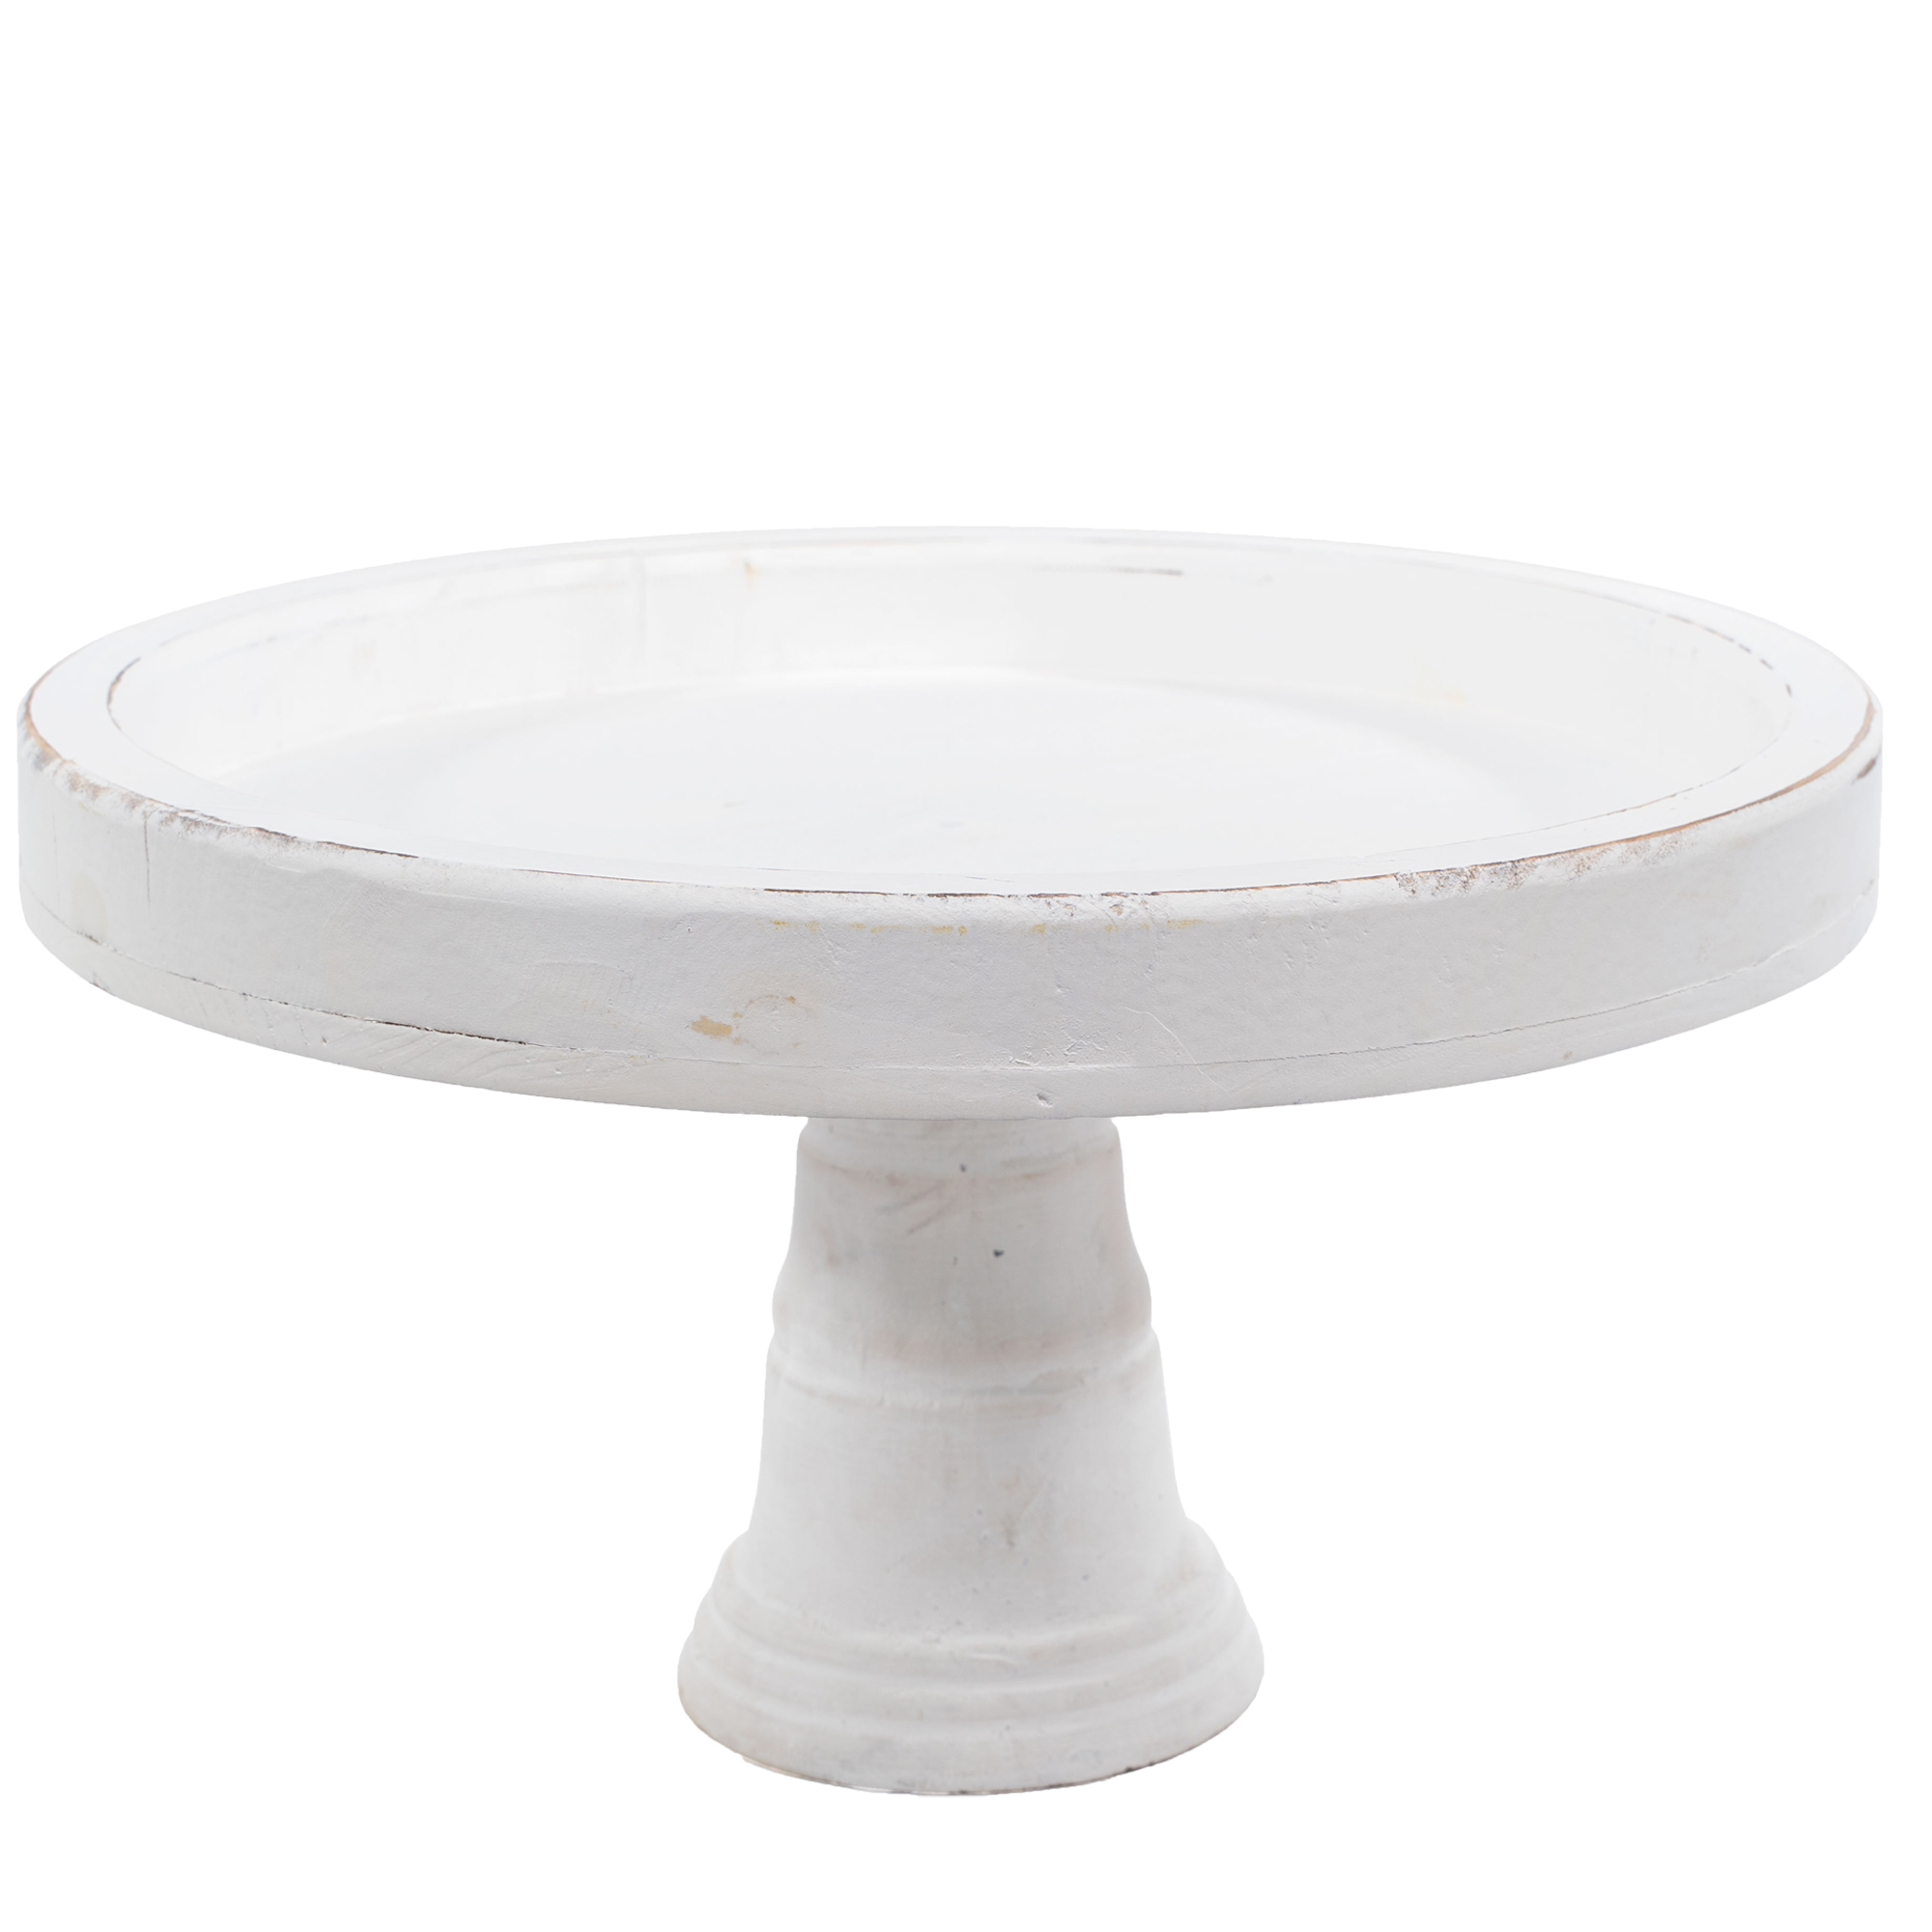 Rustic Wood Pedestal Cake Stand 7" - White